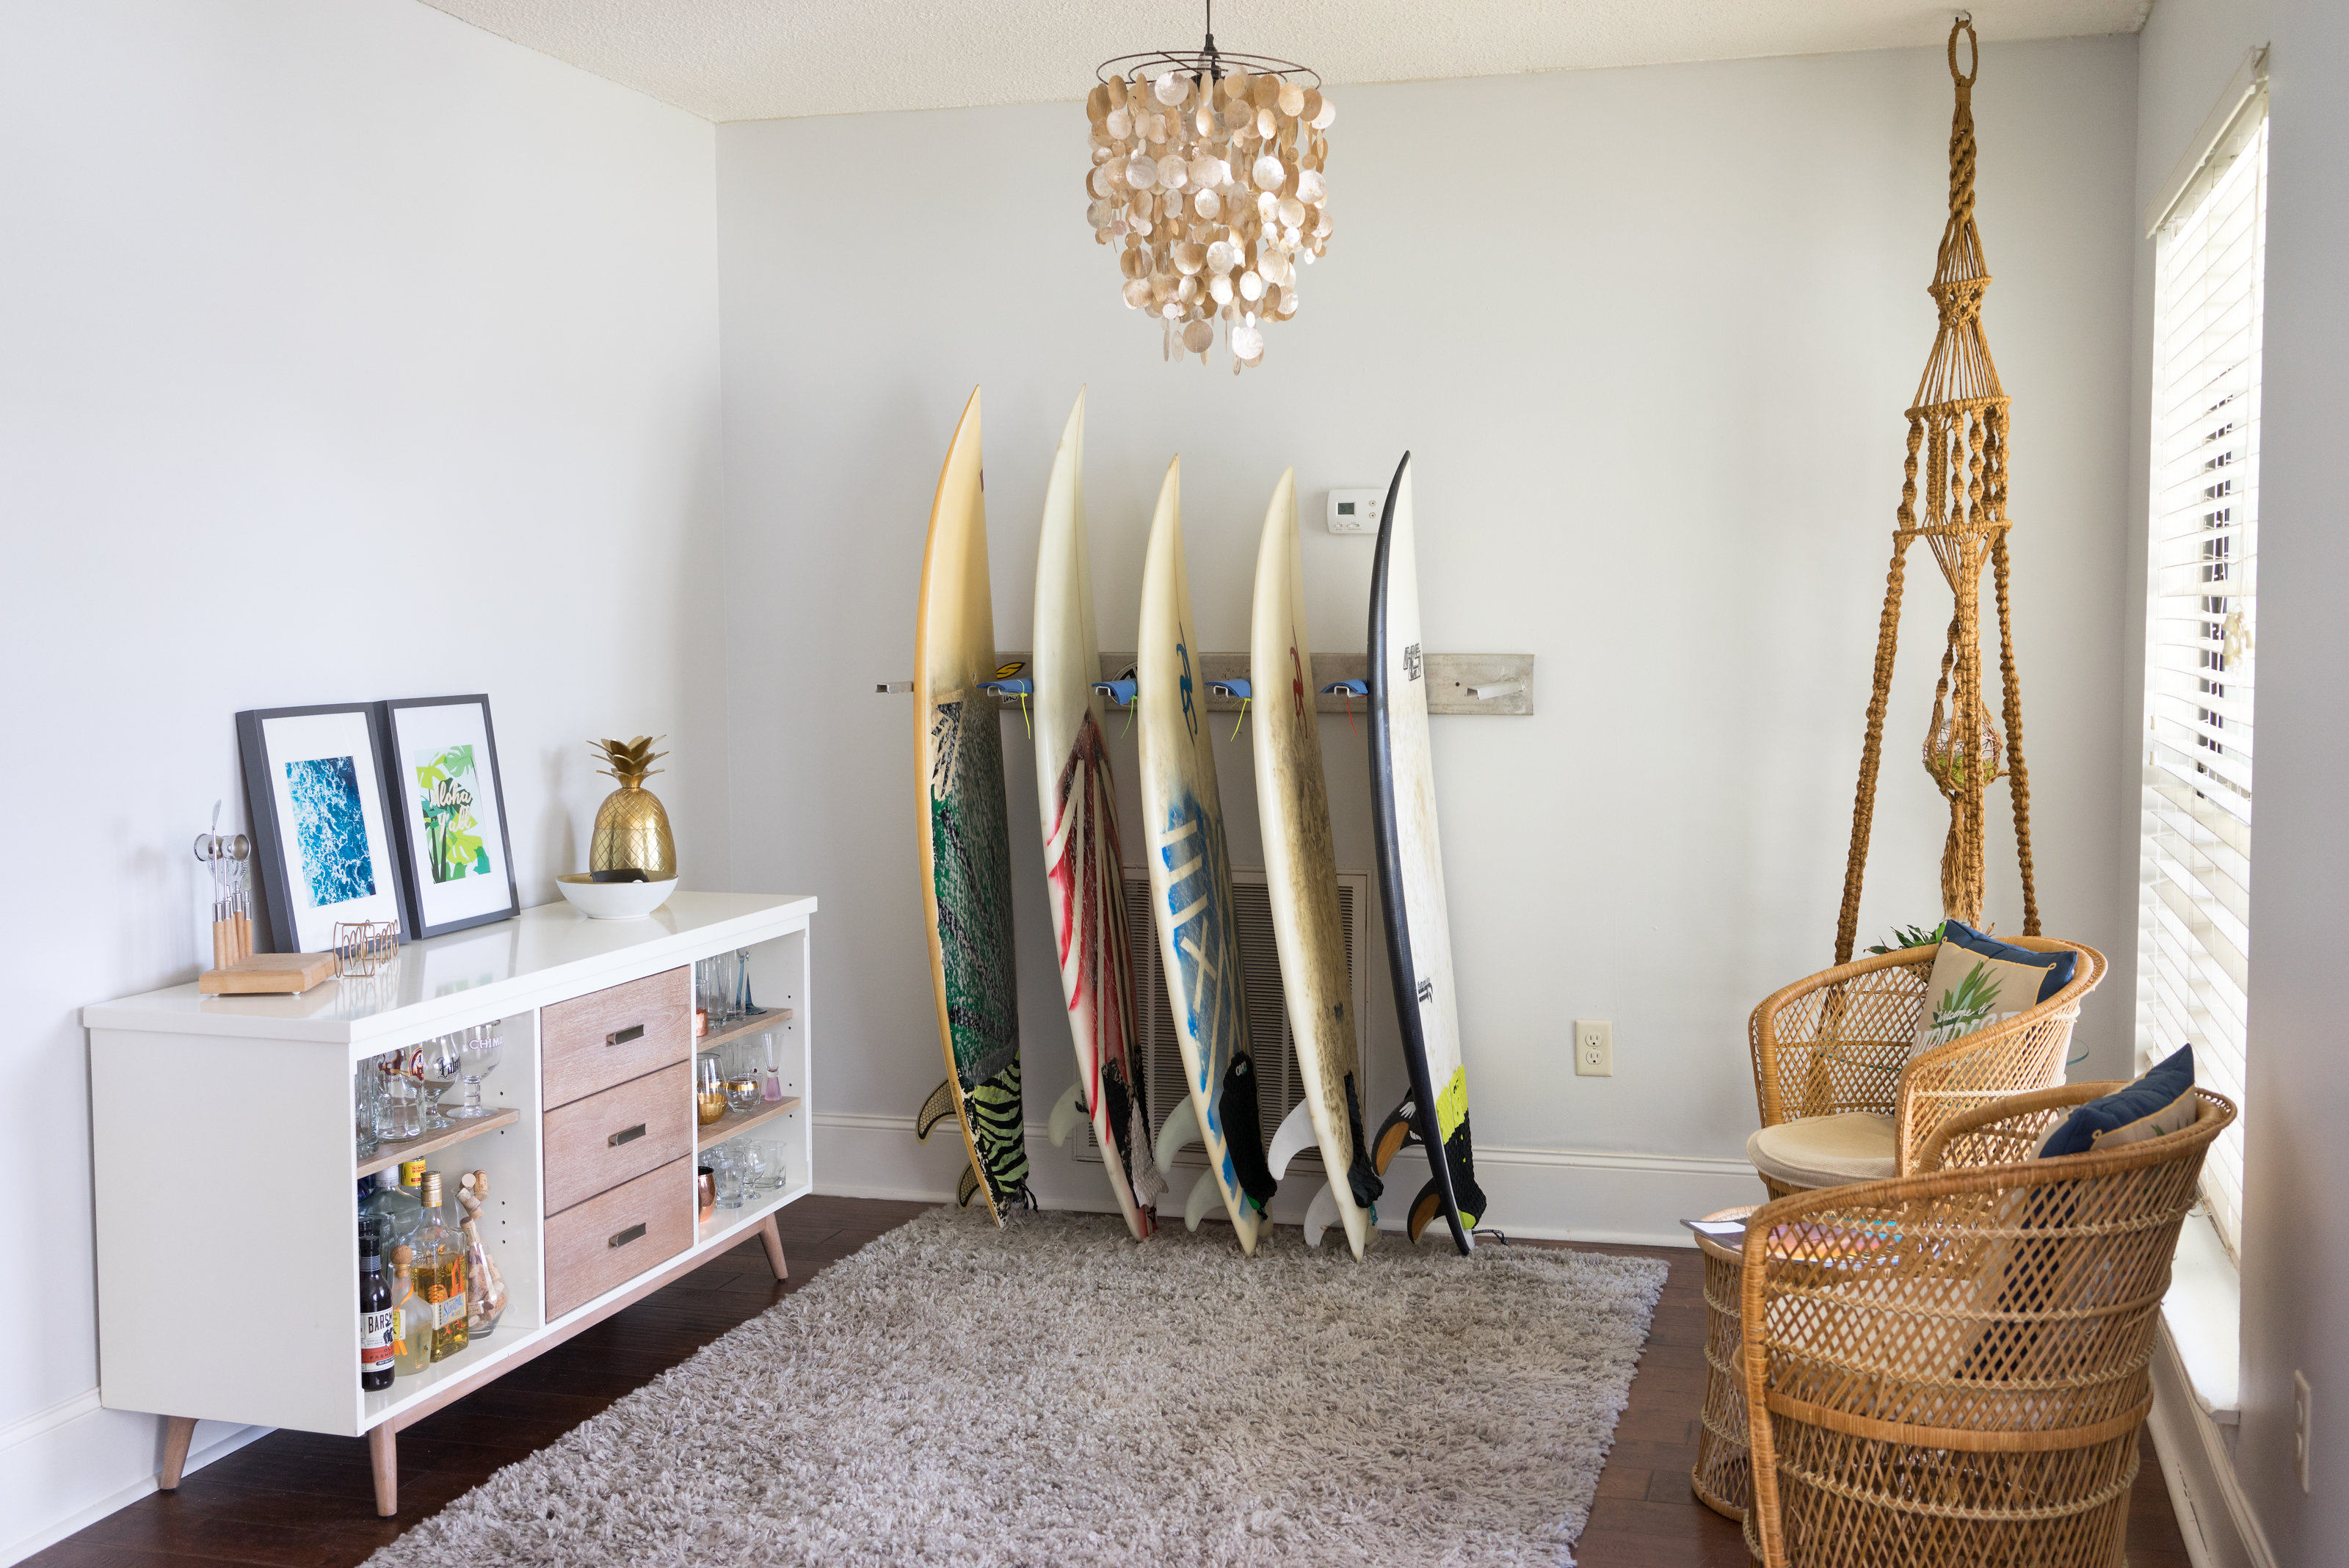 House Tour: Modern, midcentury living room with a bar cart, surfboards, and sitting area